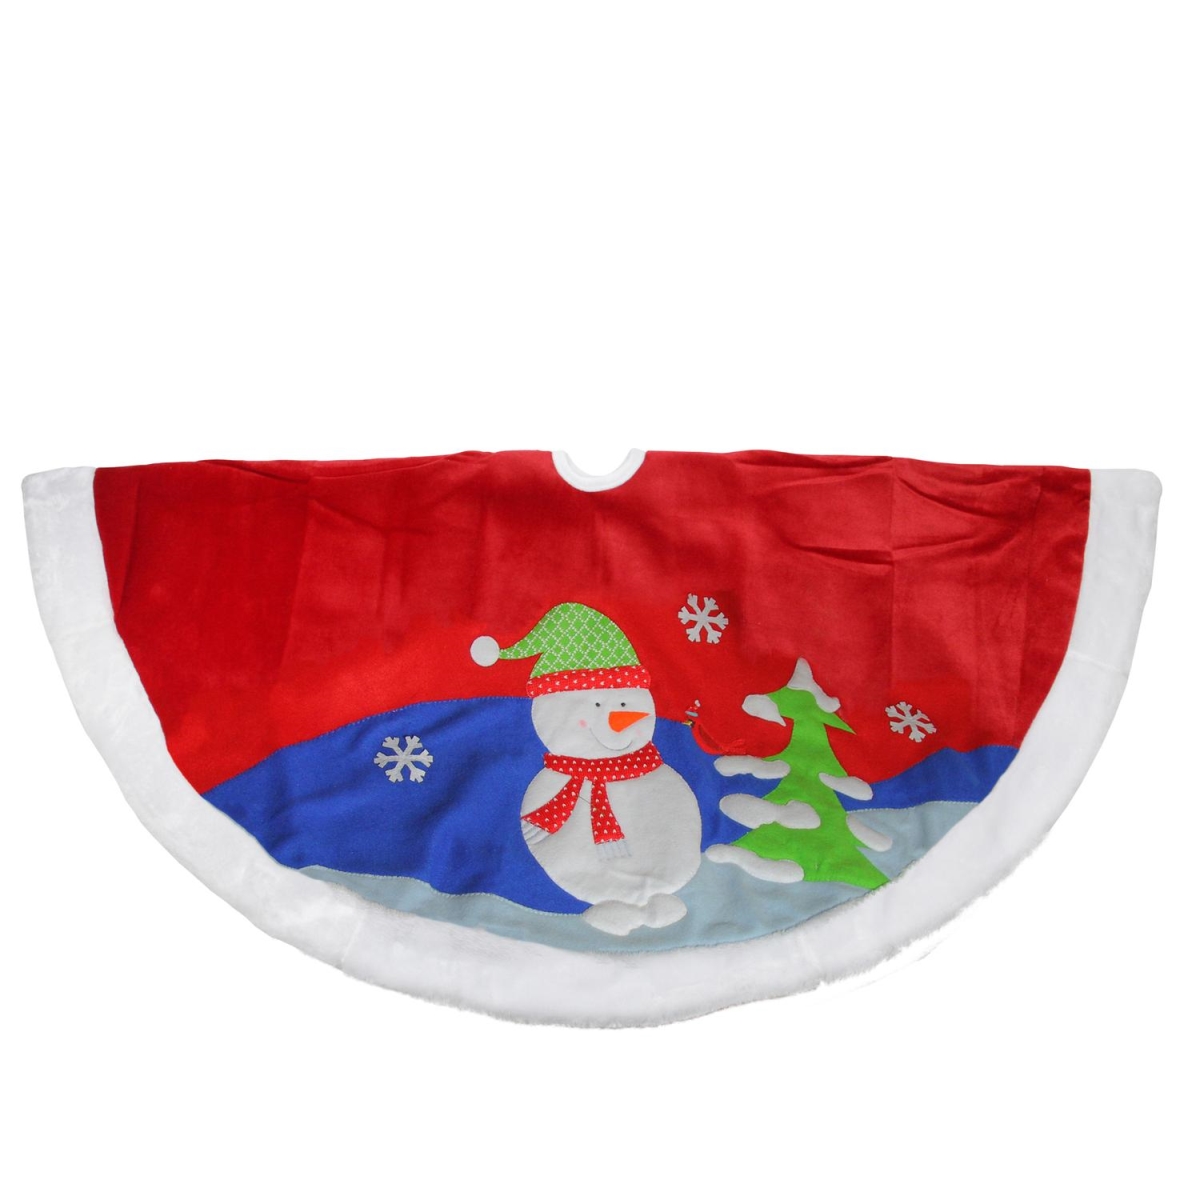 Picture of Dyno 32637394 48 in. Red Fleece Christmas Snowman Winter Tree Skirt with White Faux Fur Trim